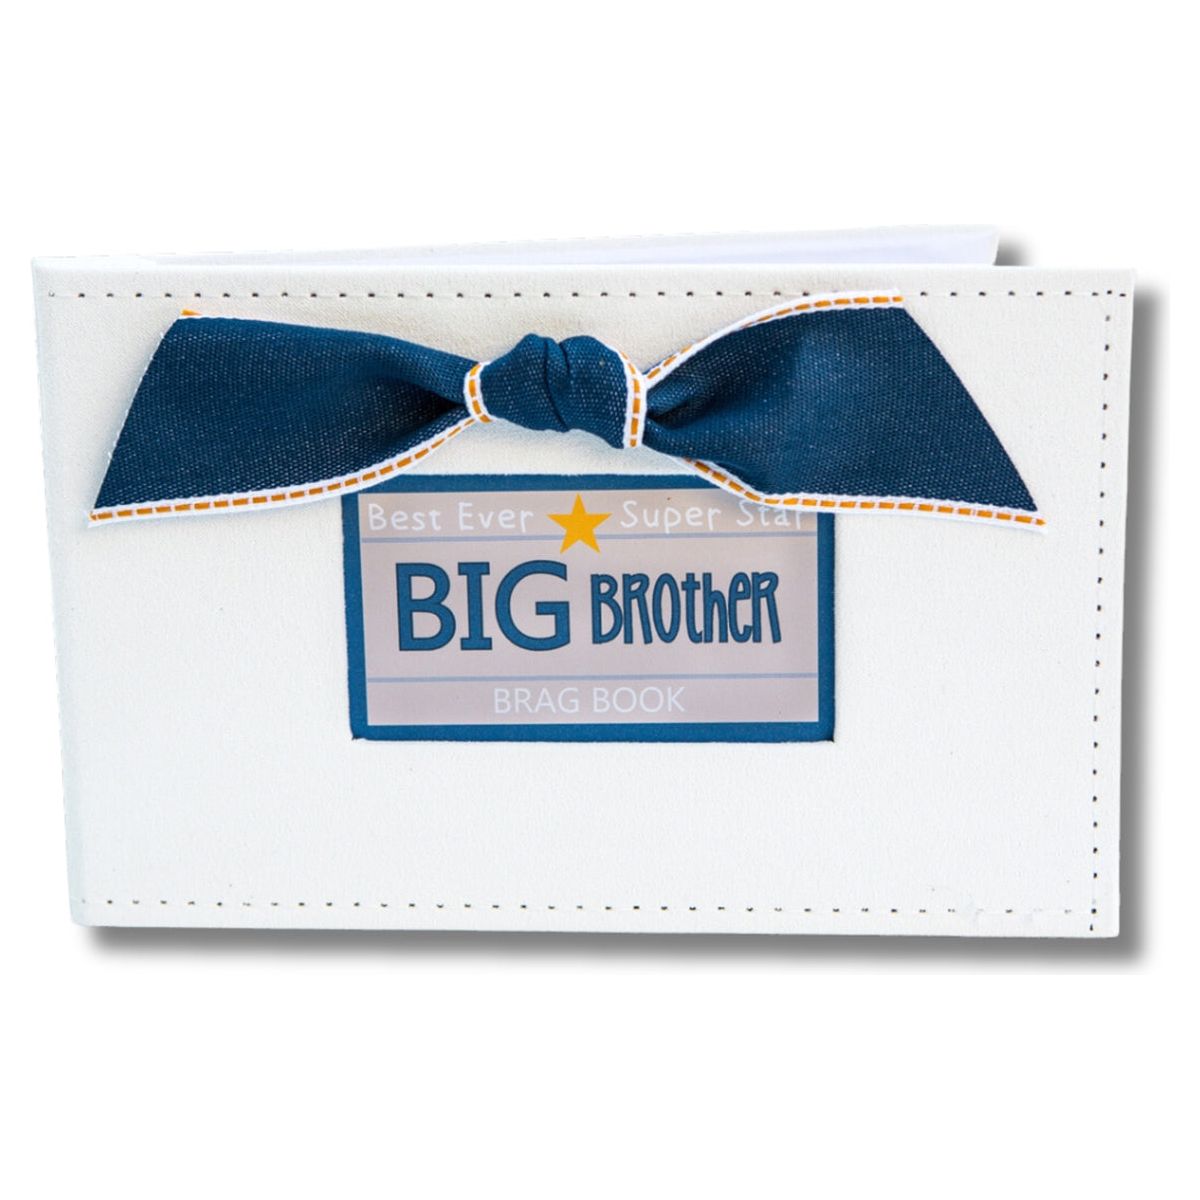 5x7 white faux suede Big Brother photo brag book with blue bow to hold 32 4x6 or 3.5x5 photos.